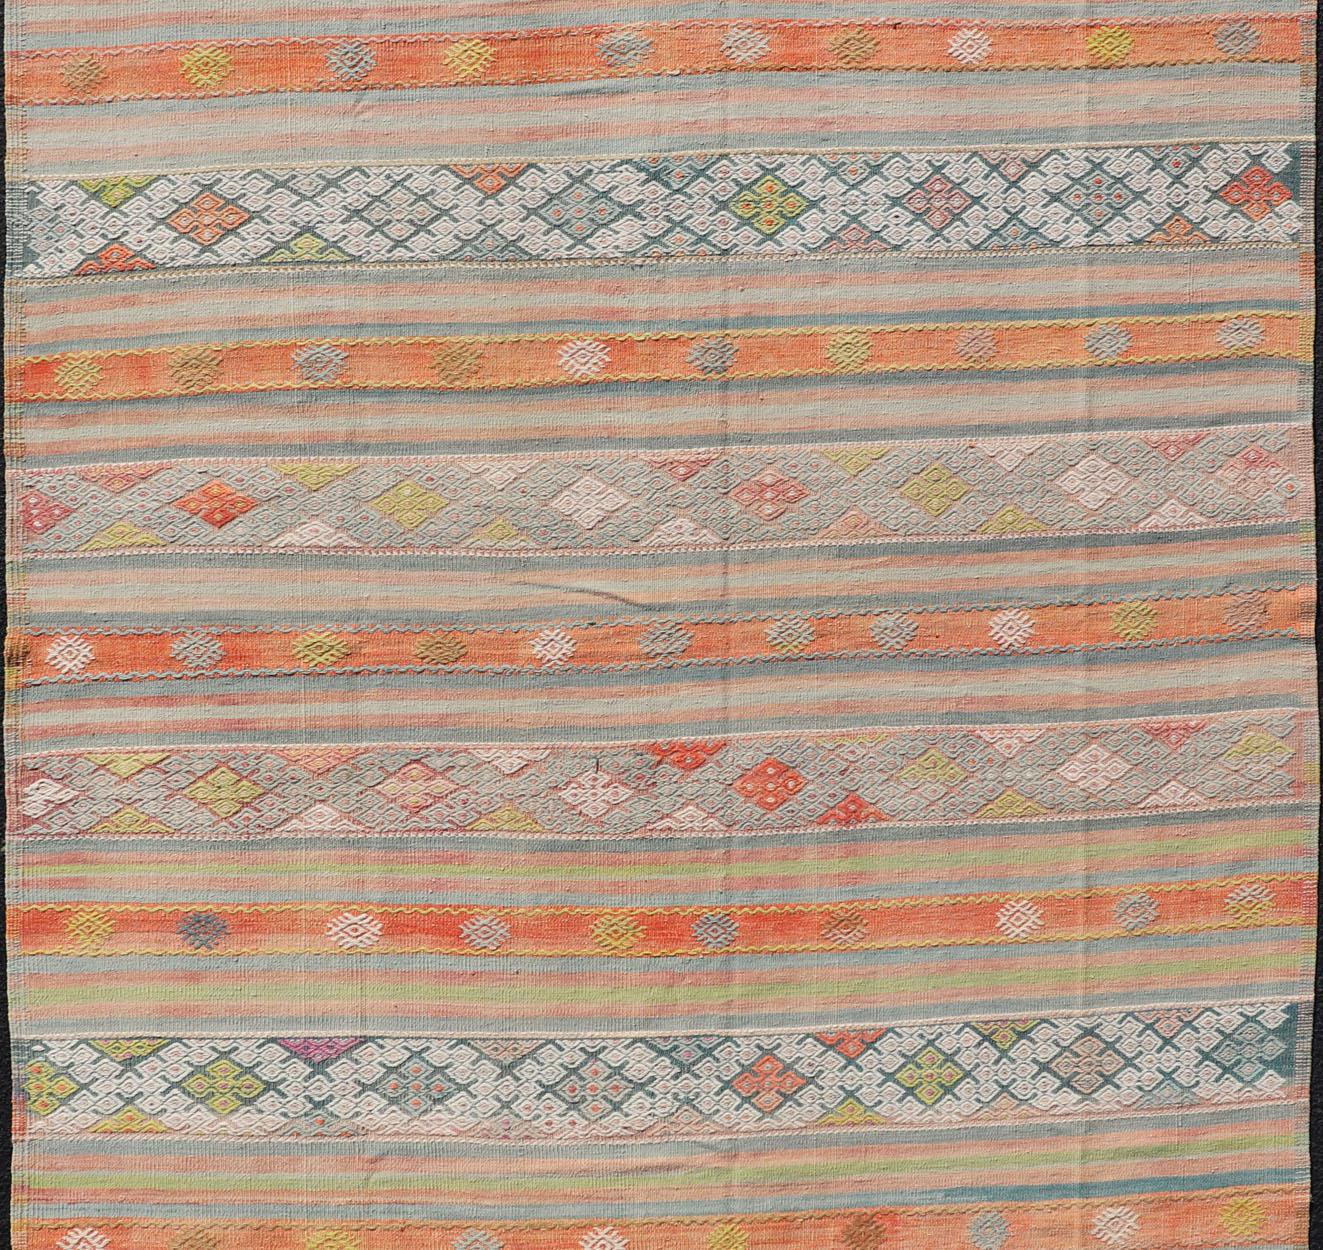 Hand-Woven Colorful Vintage Turkish Embroidered Kilim With Stripe's and Geometric Motifs For Sale